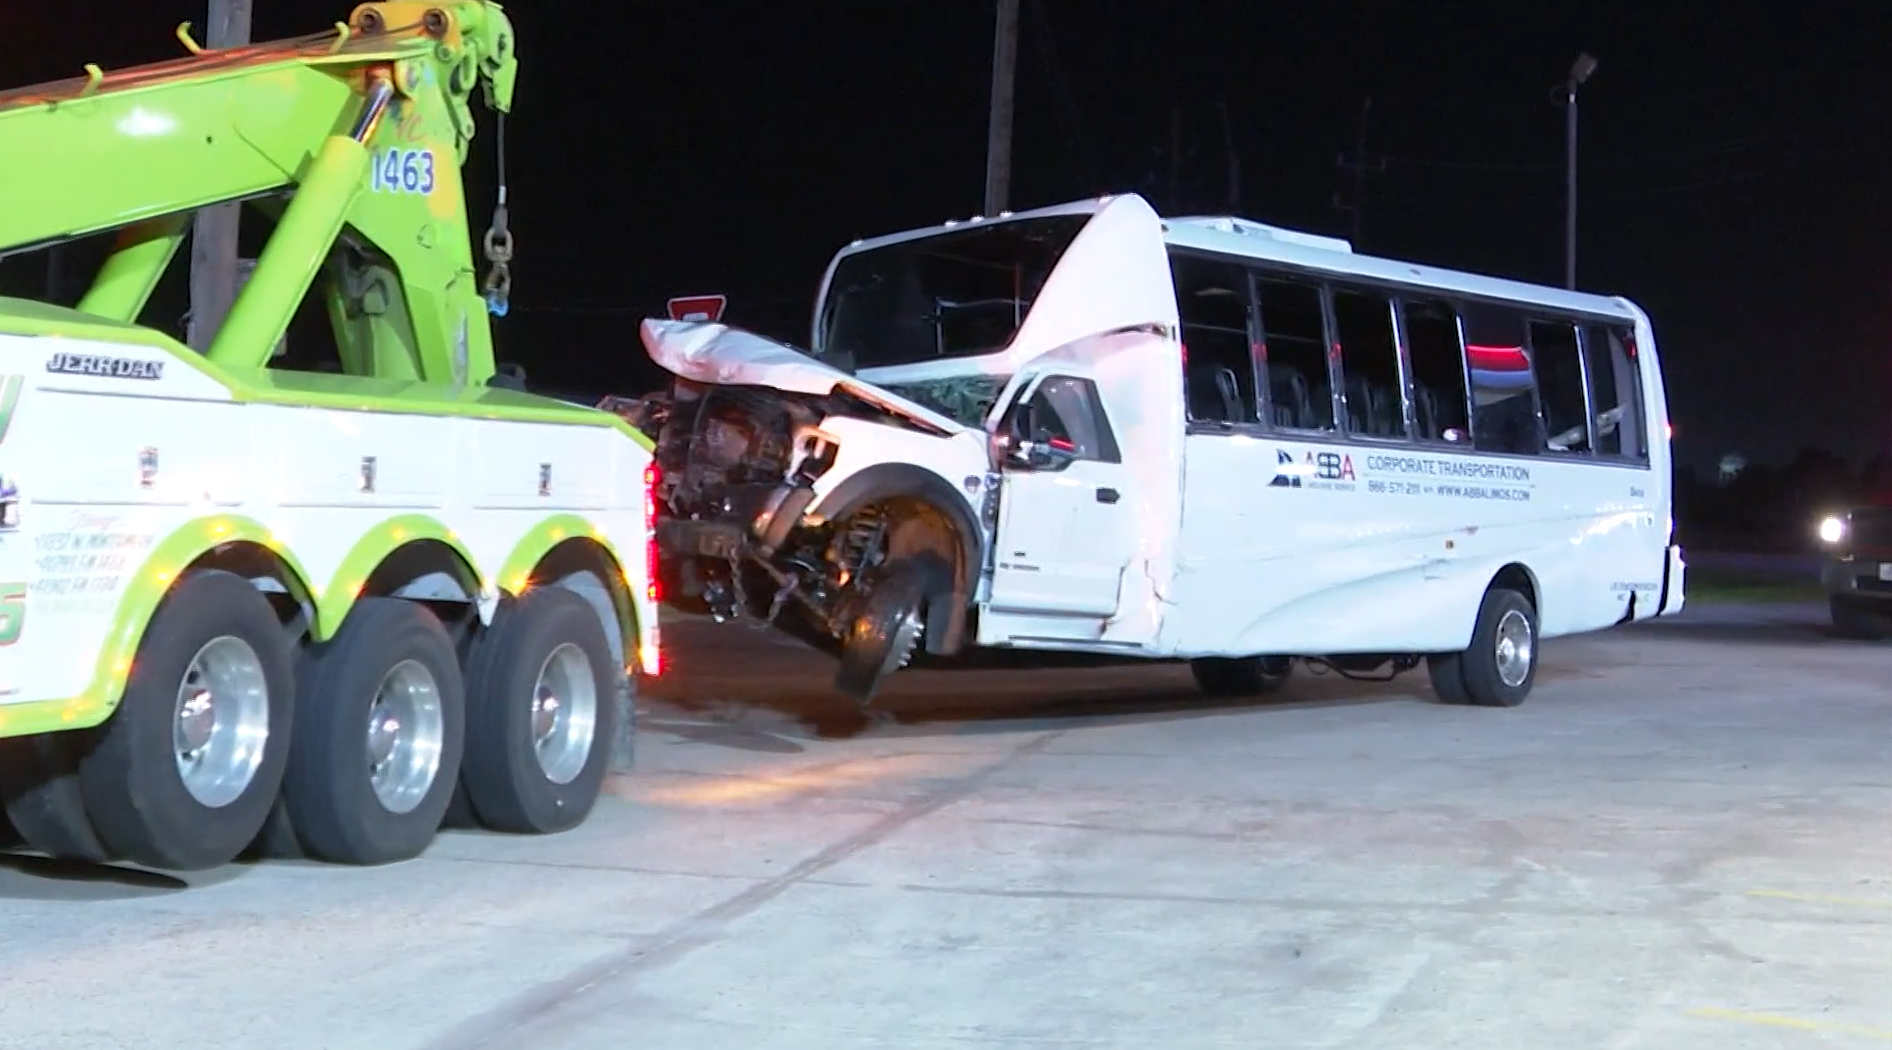 16 Injured in Rollover Bus Accident in Waller County